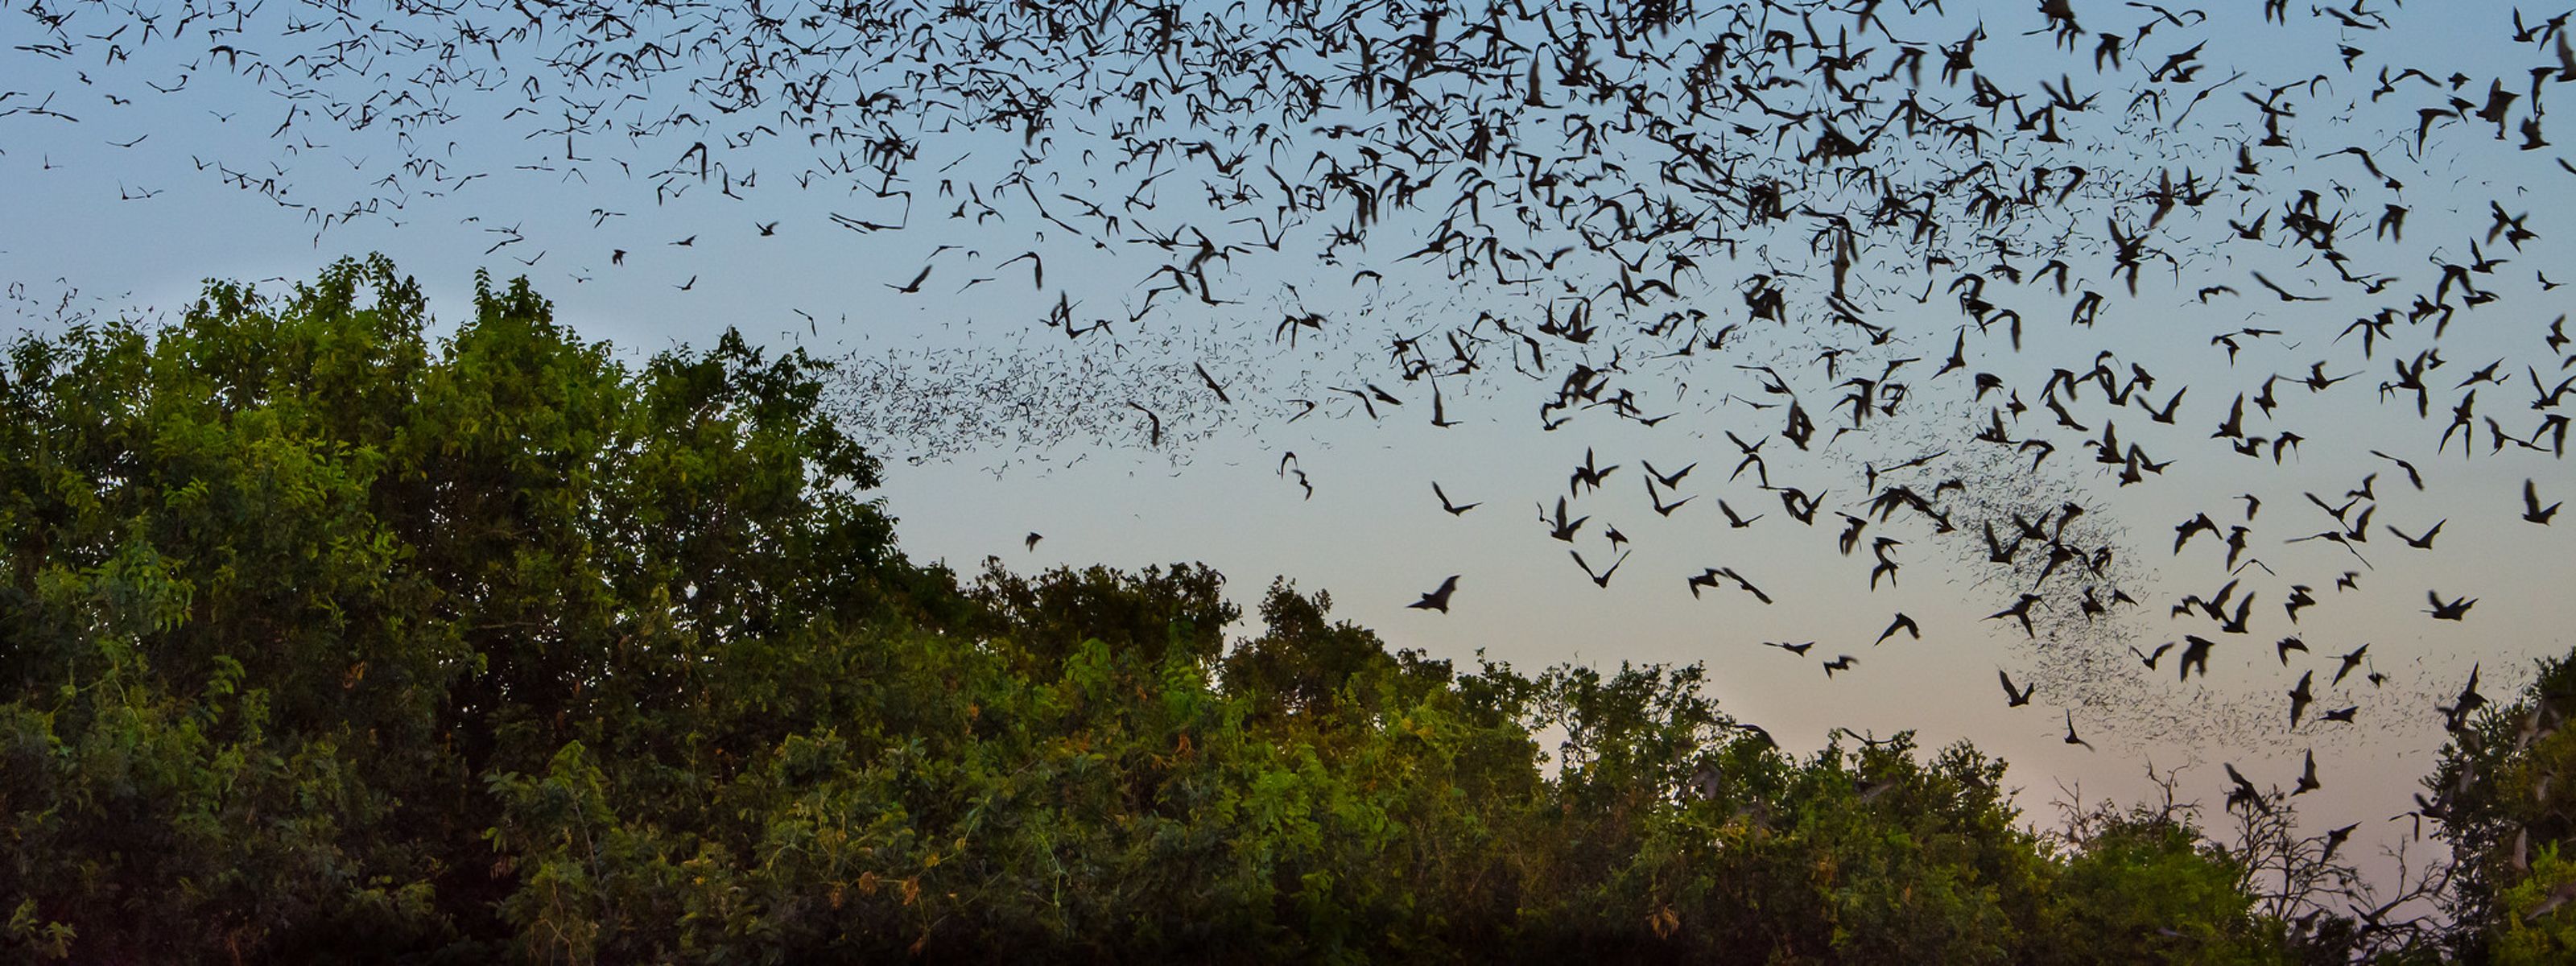 The sun sets as millions of bats take to the sky.